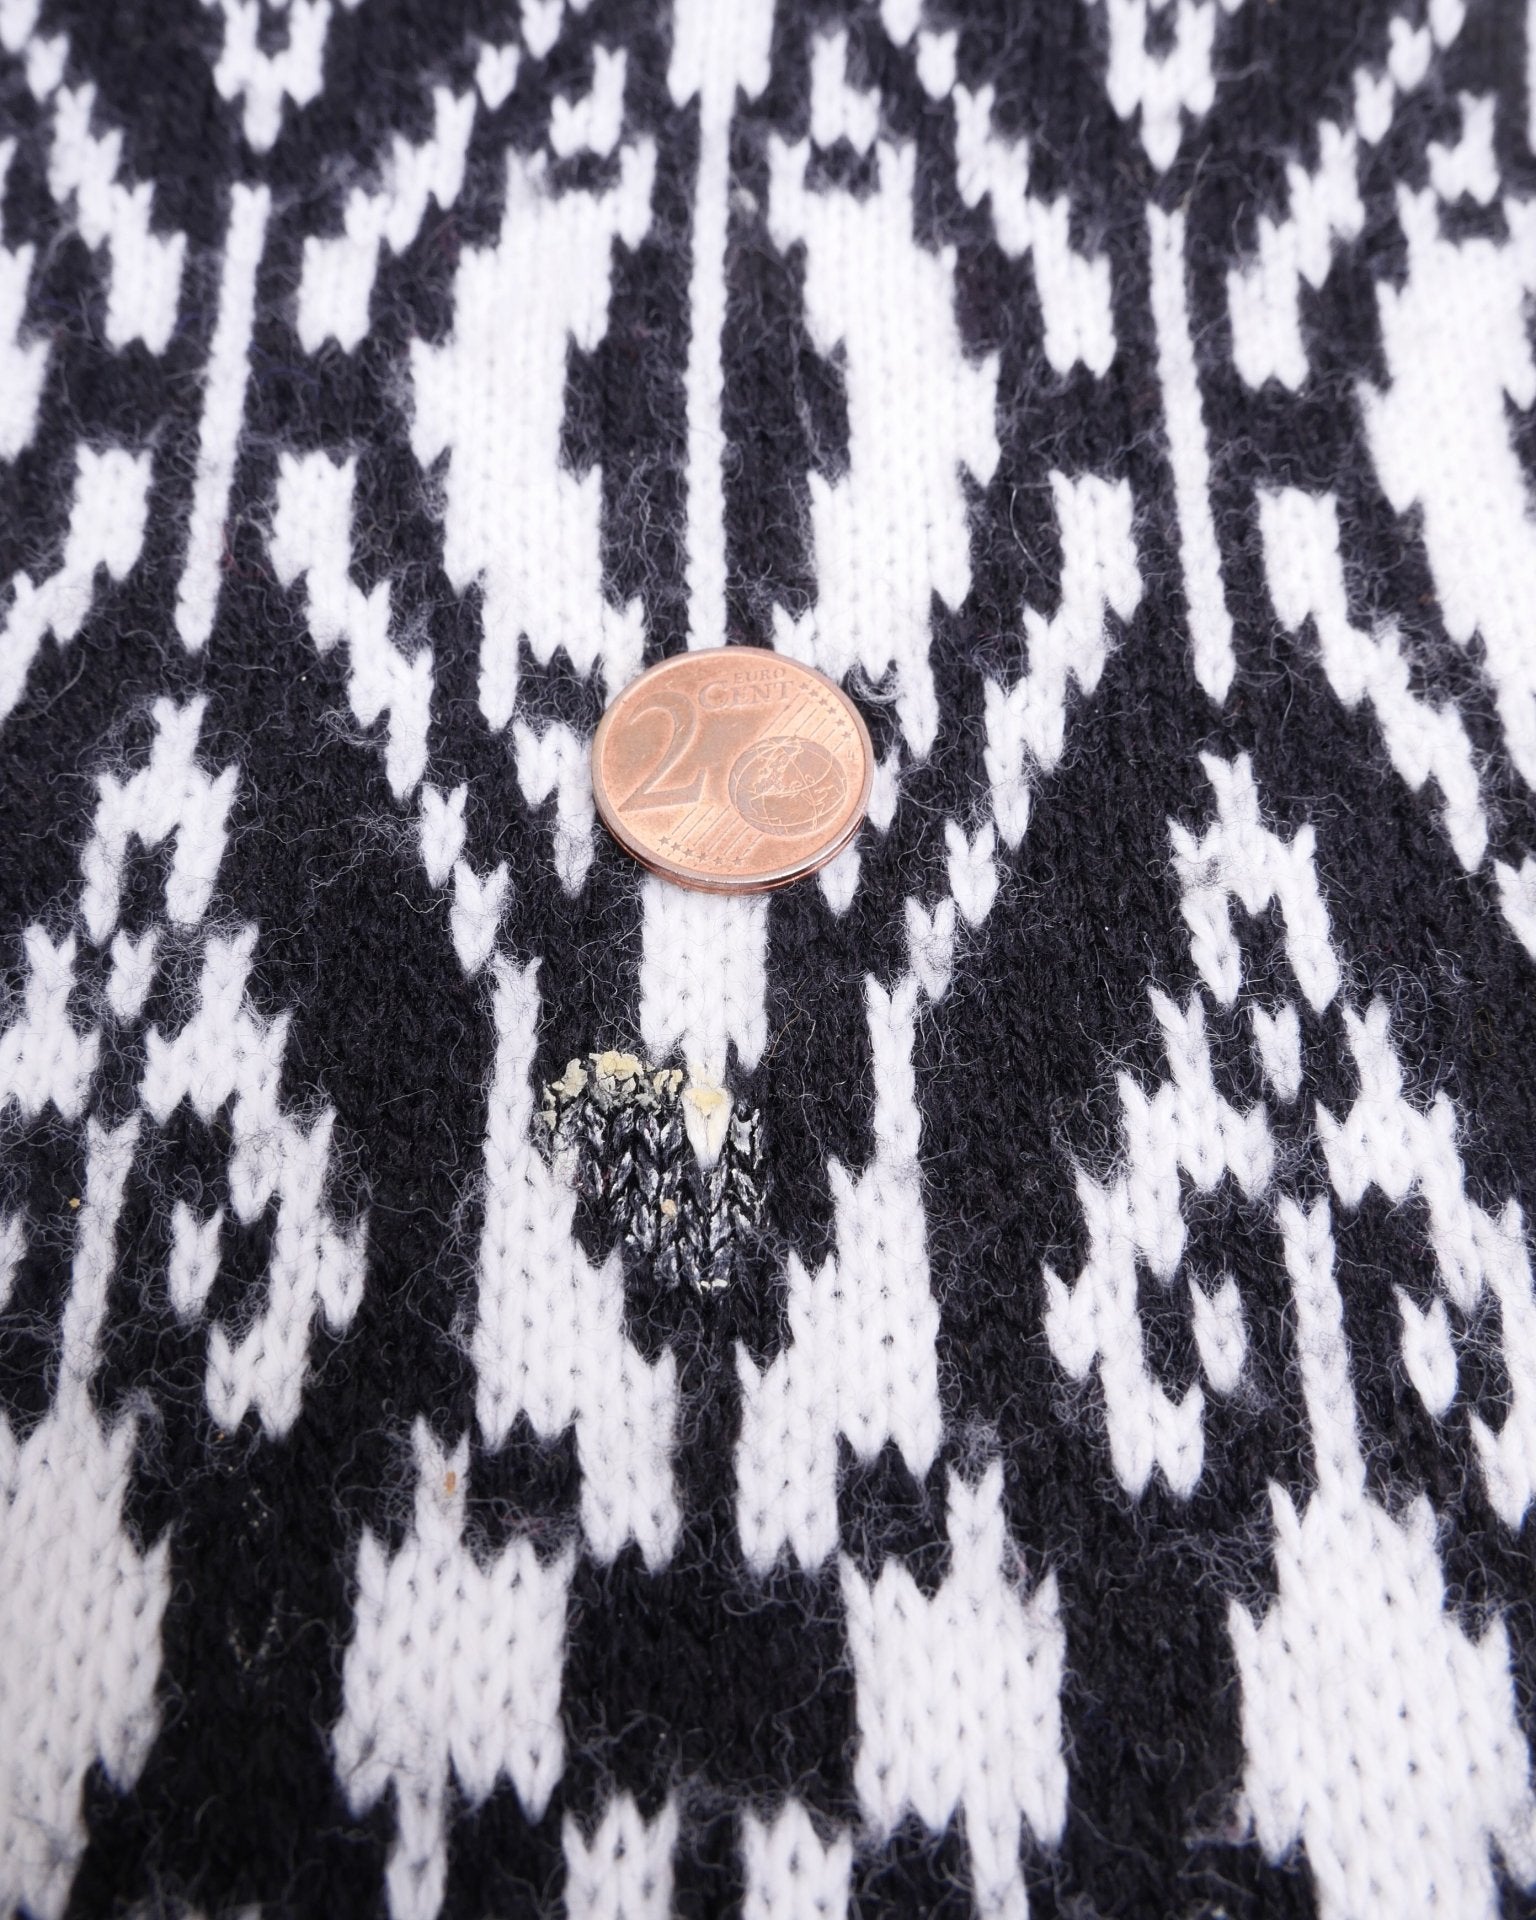 knitted black and white patterned Vintage Sweater - Peeces